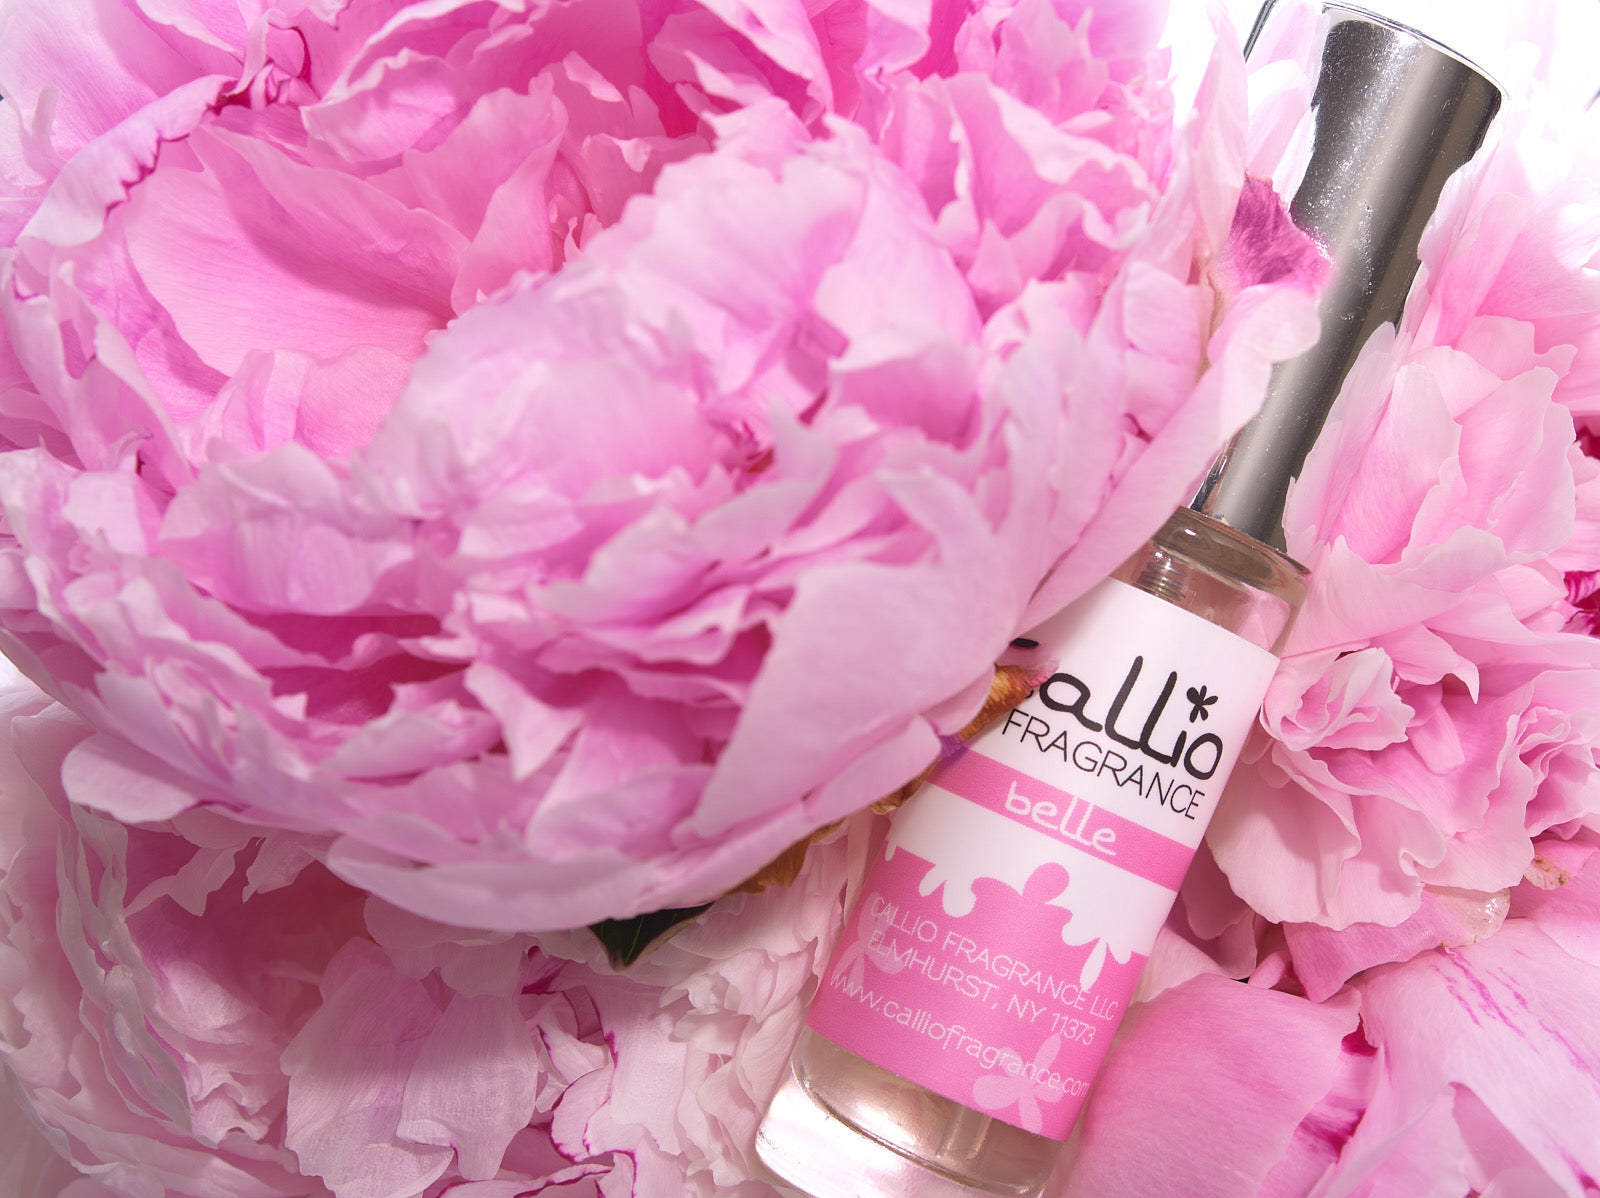 Belle Travel Perfume Spray with pink peonies.